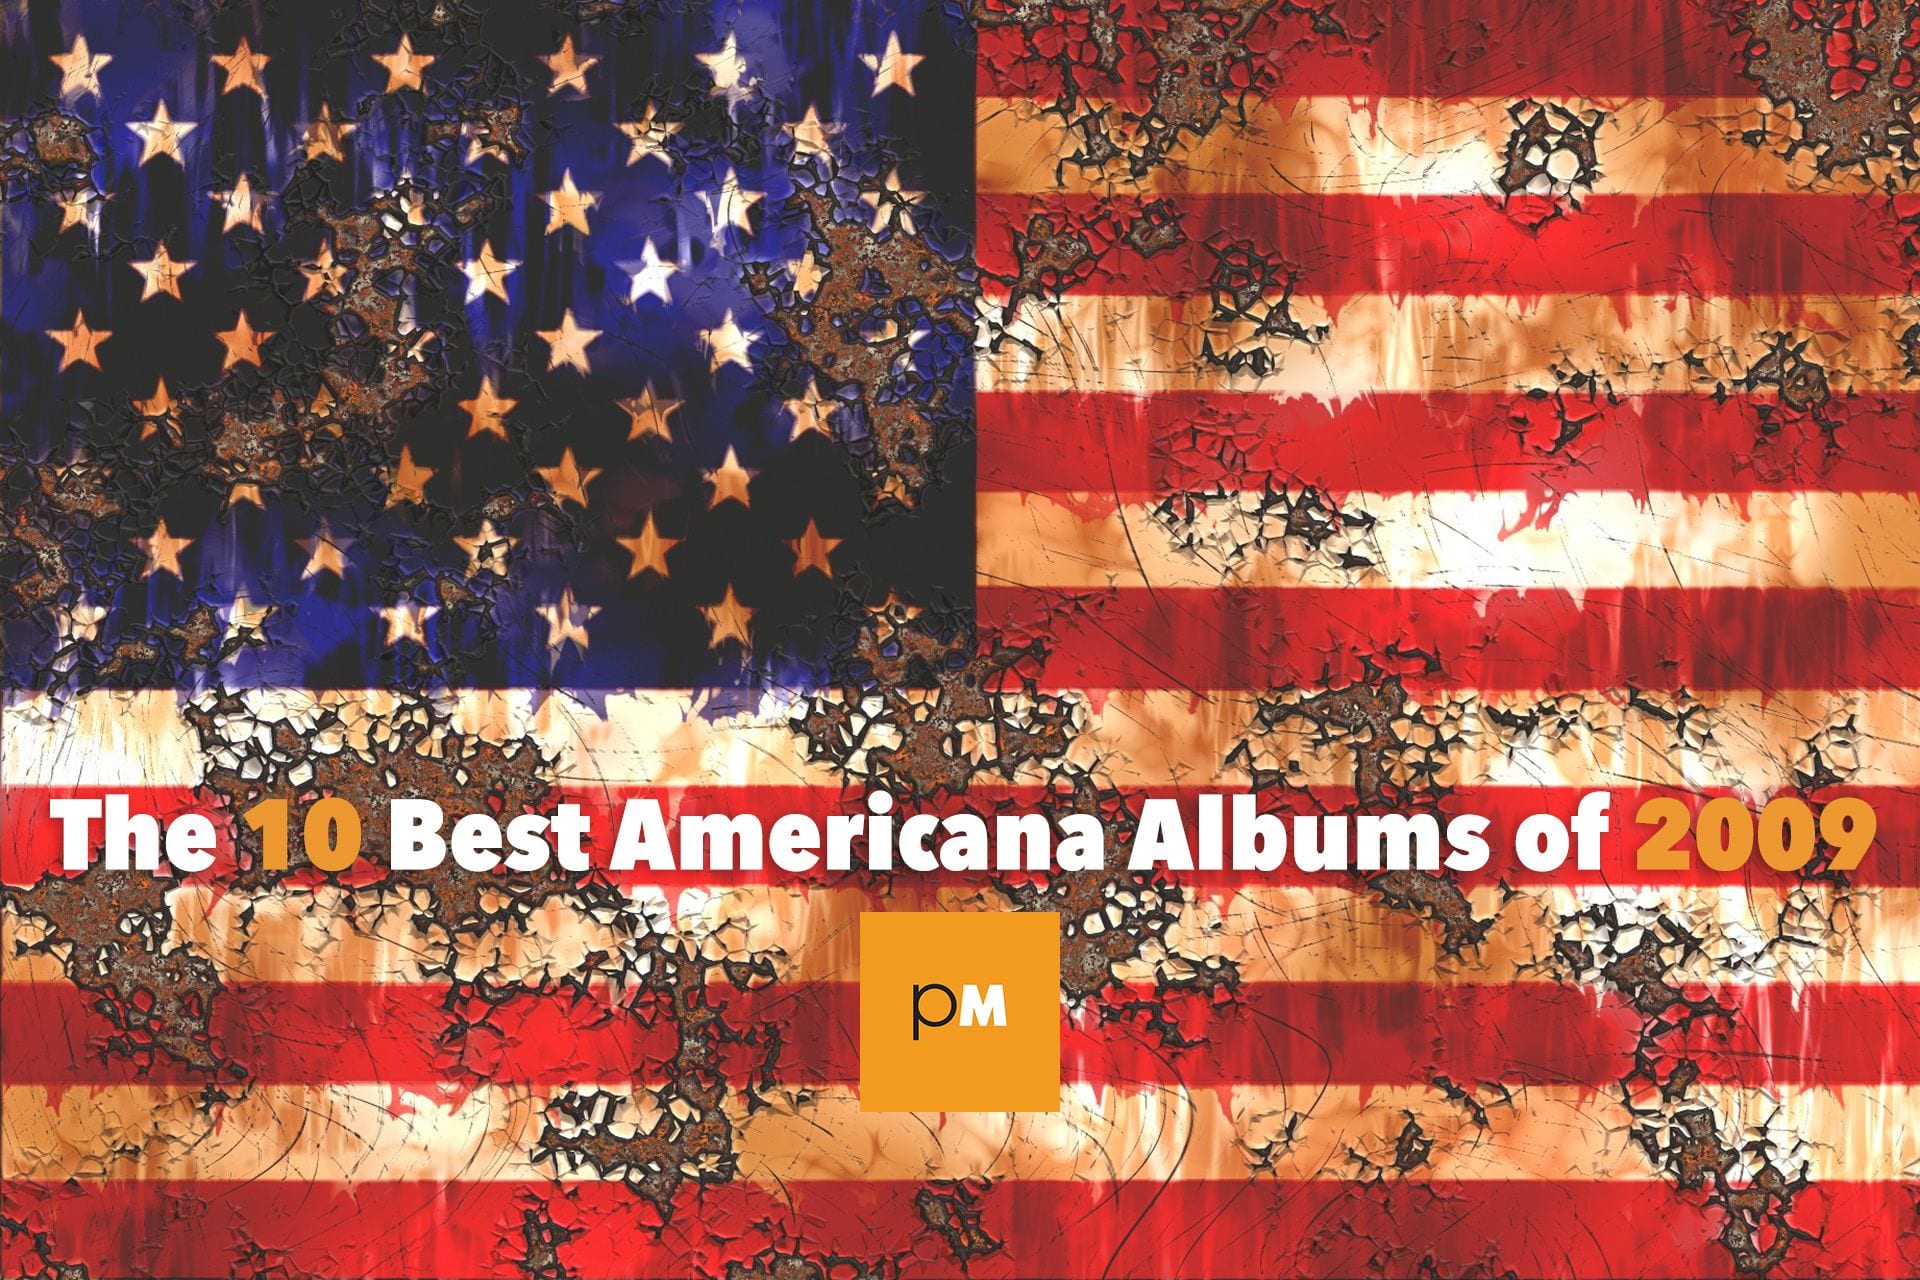 The 10 Best Americana Albums of 2009